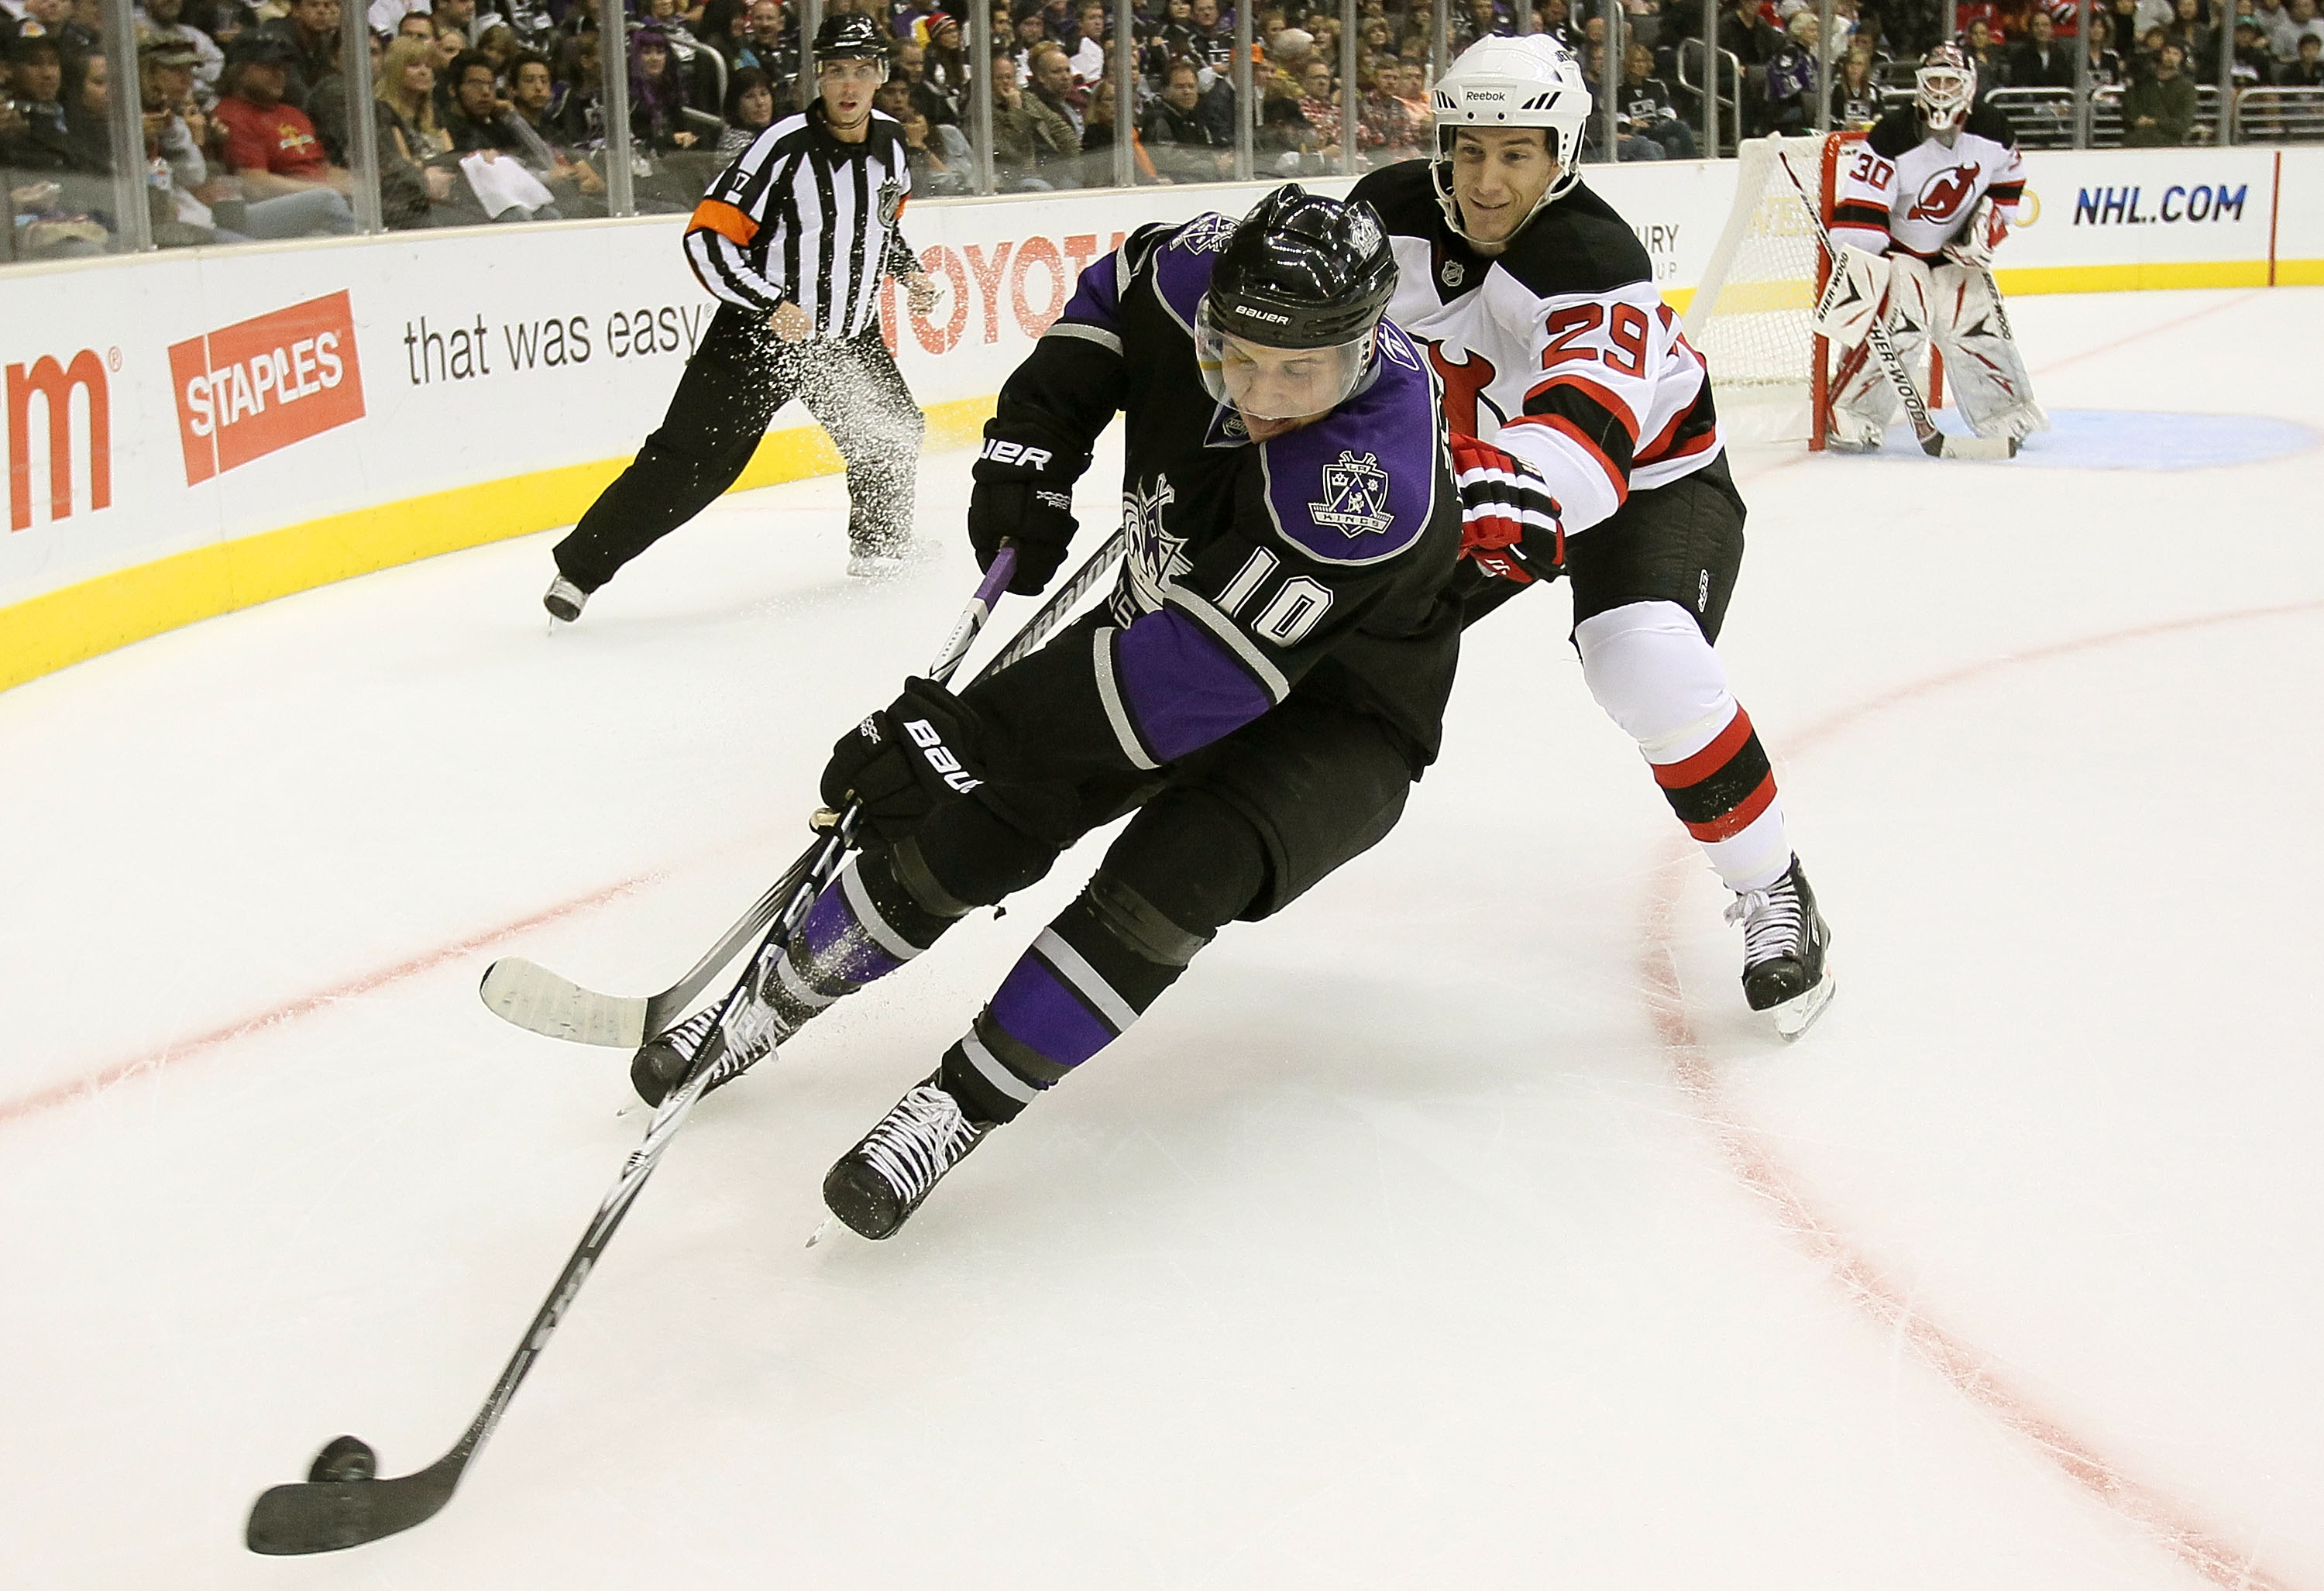 Brayden Schenn continues to be Mr. Consistent for points, assists